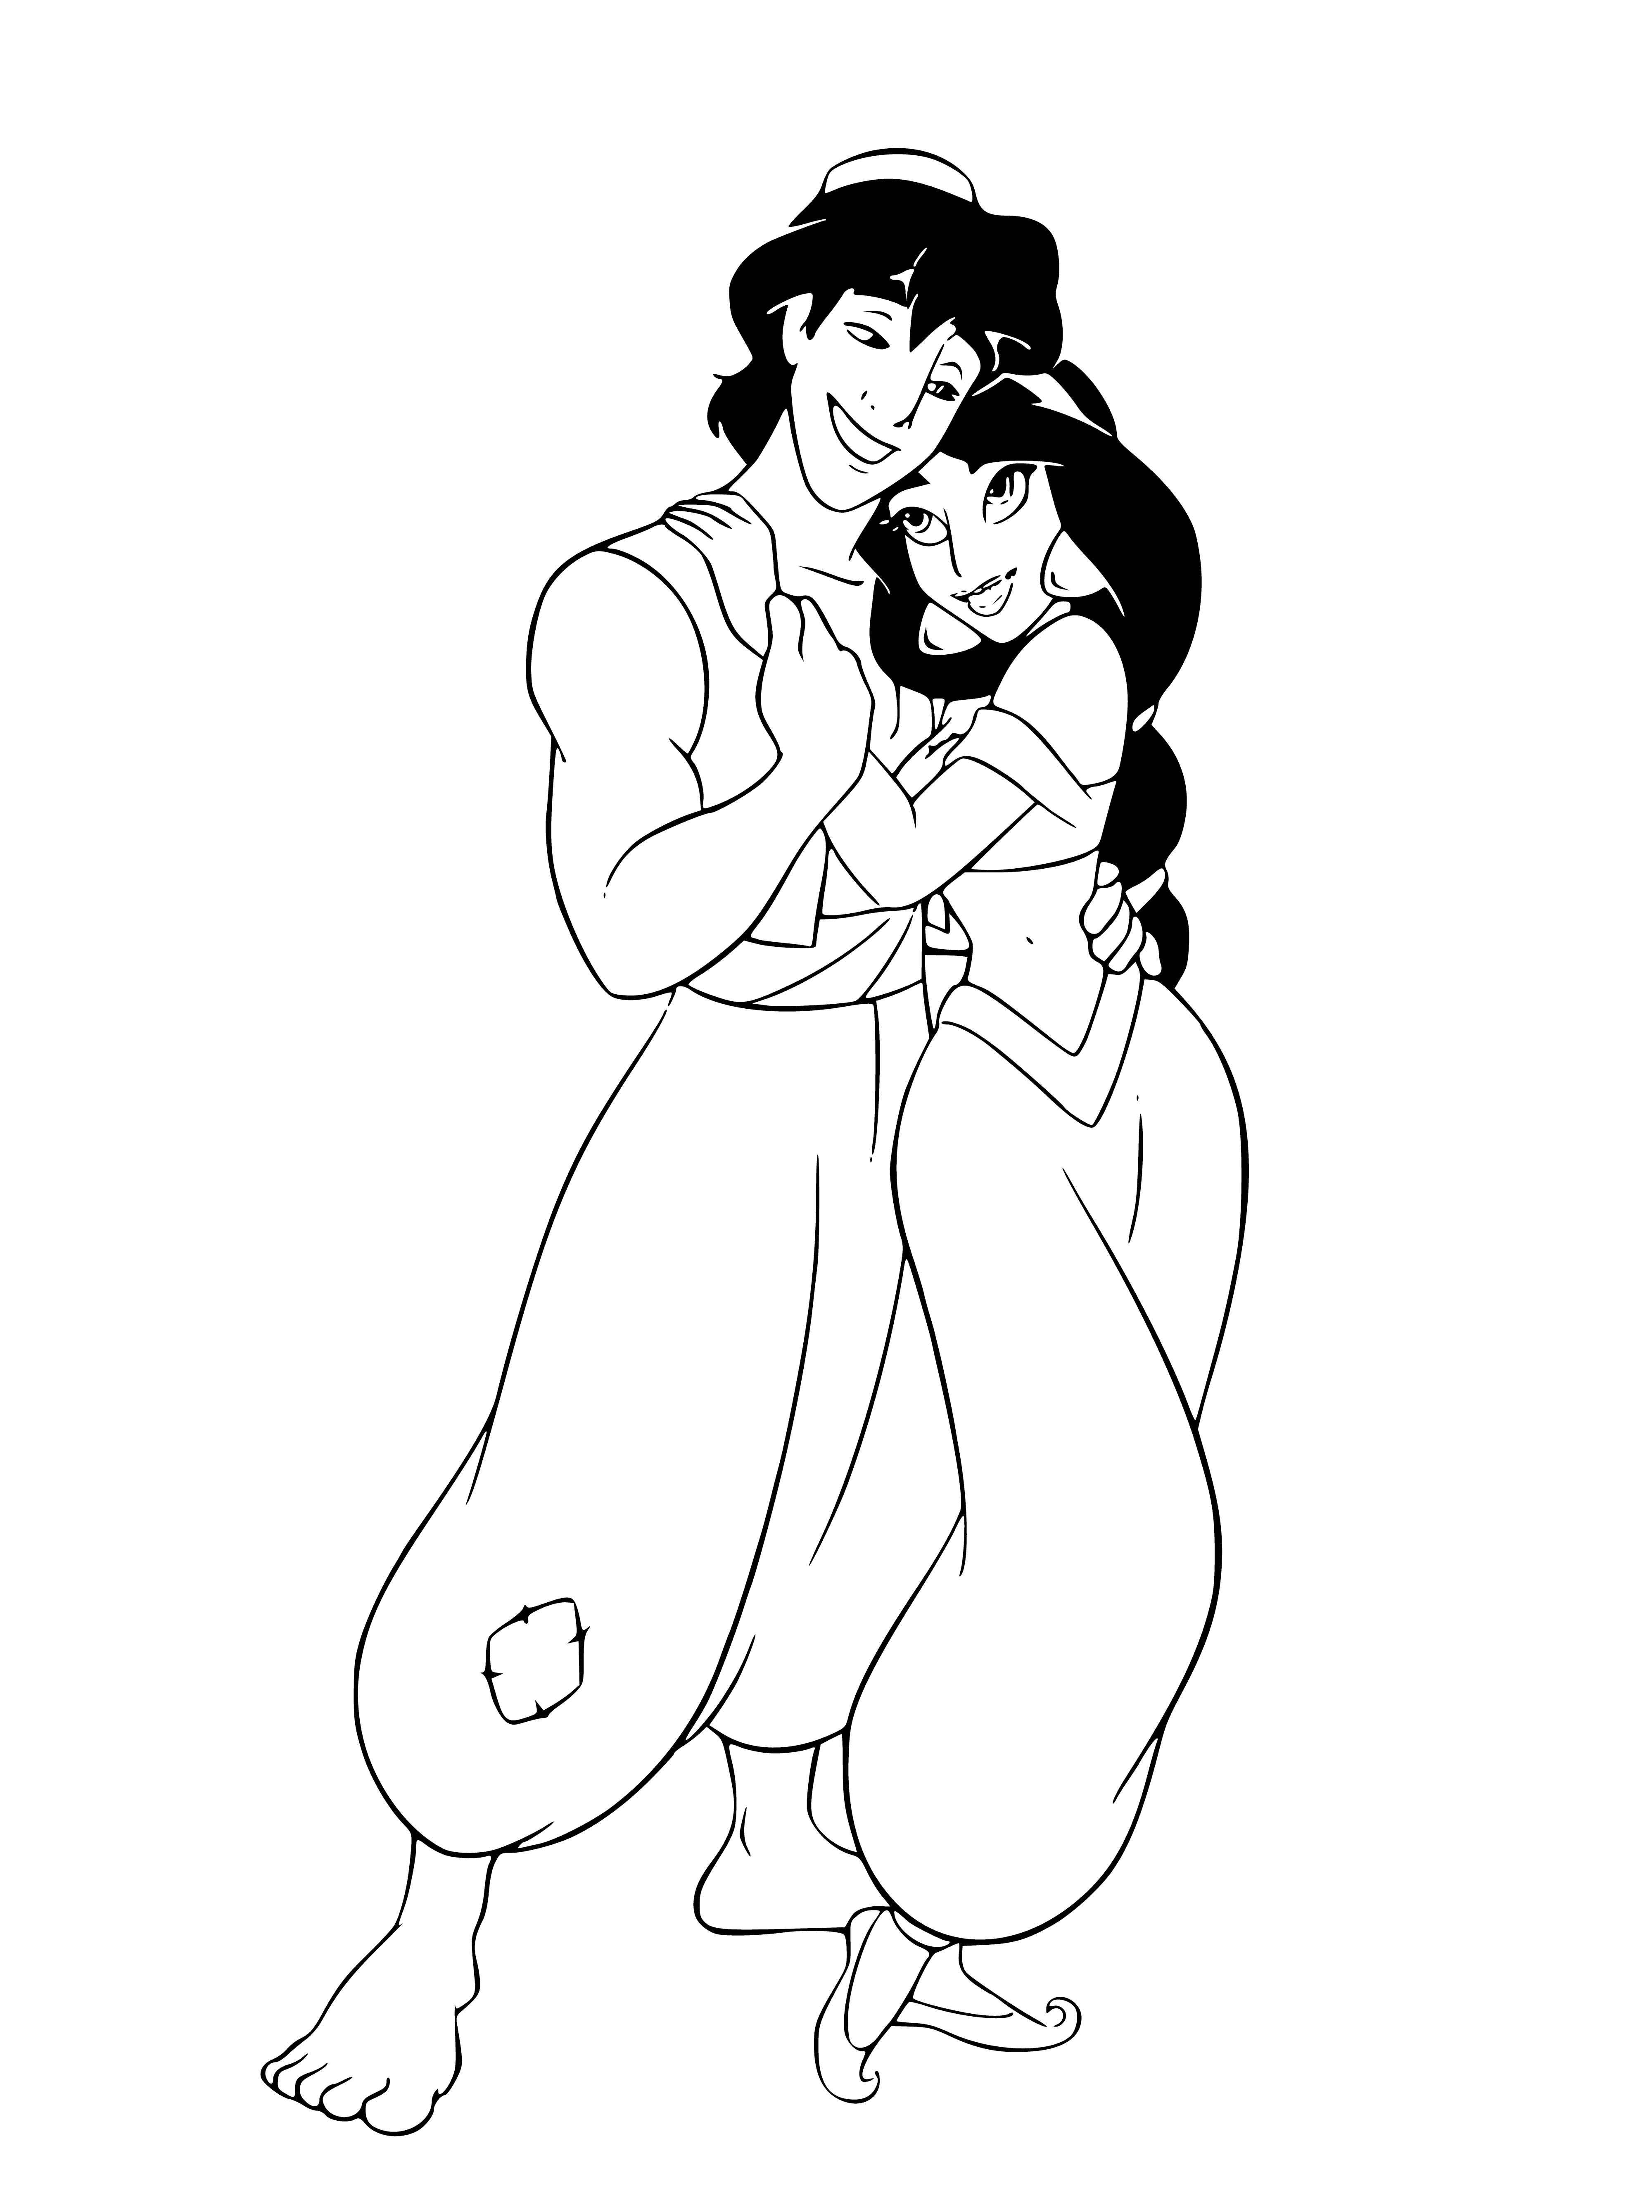 coloring page: Aladdin kneels before Princess Jasmine, offering a ring while they're surrounded in magical twinkles of light.